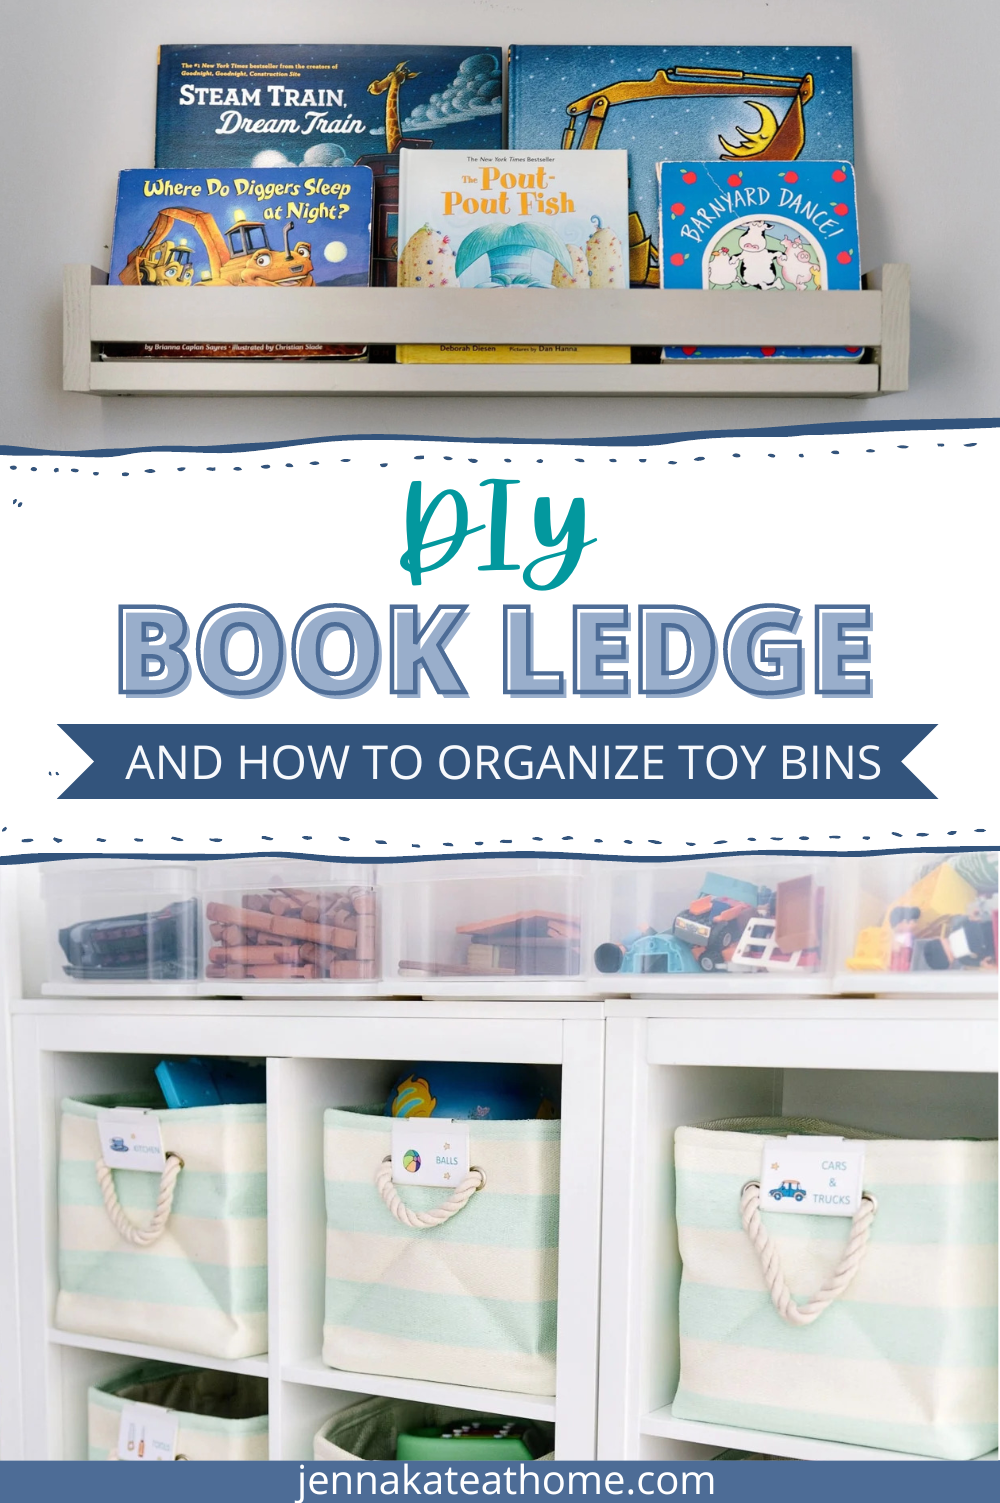 DIY book ledge and how to organize toys